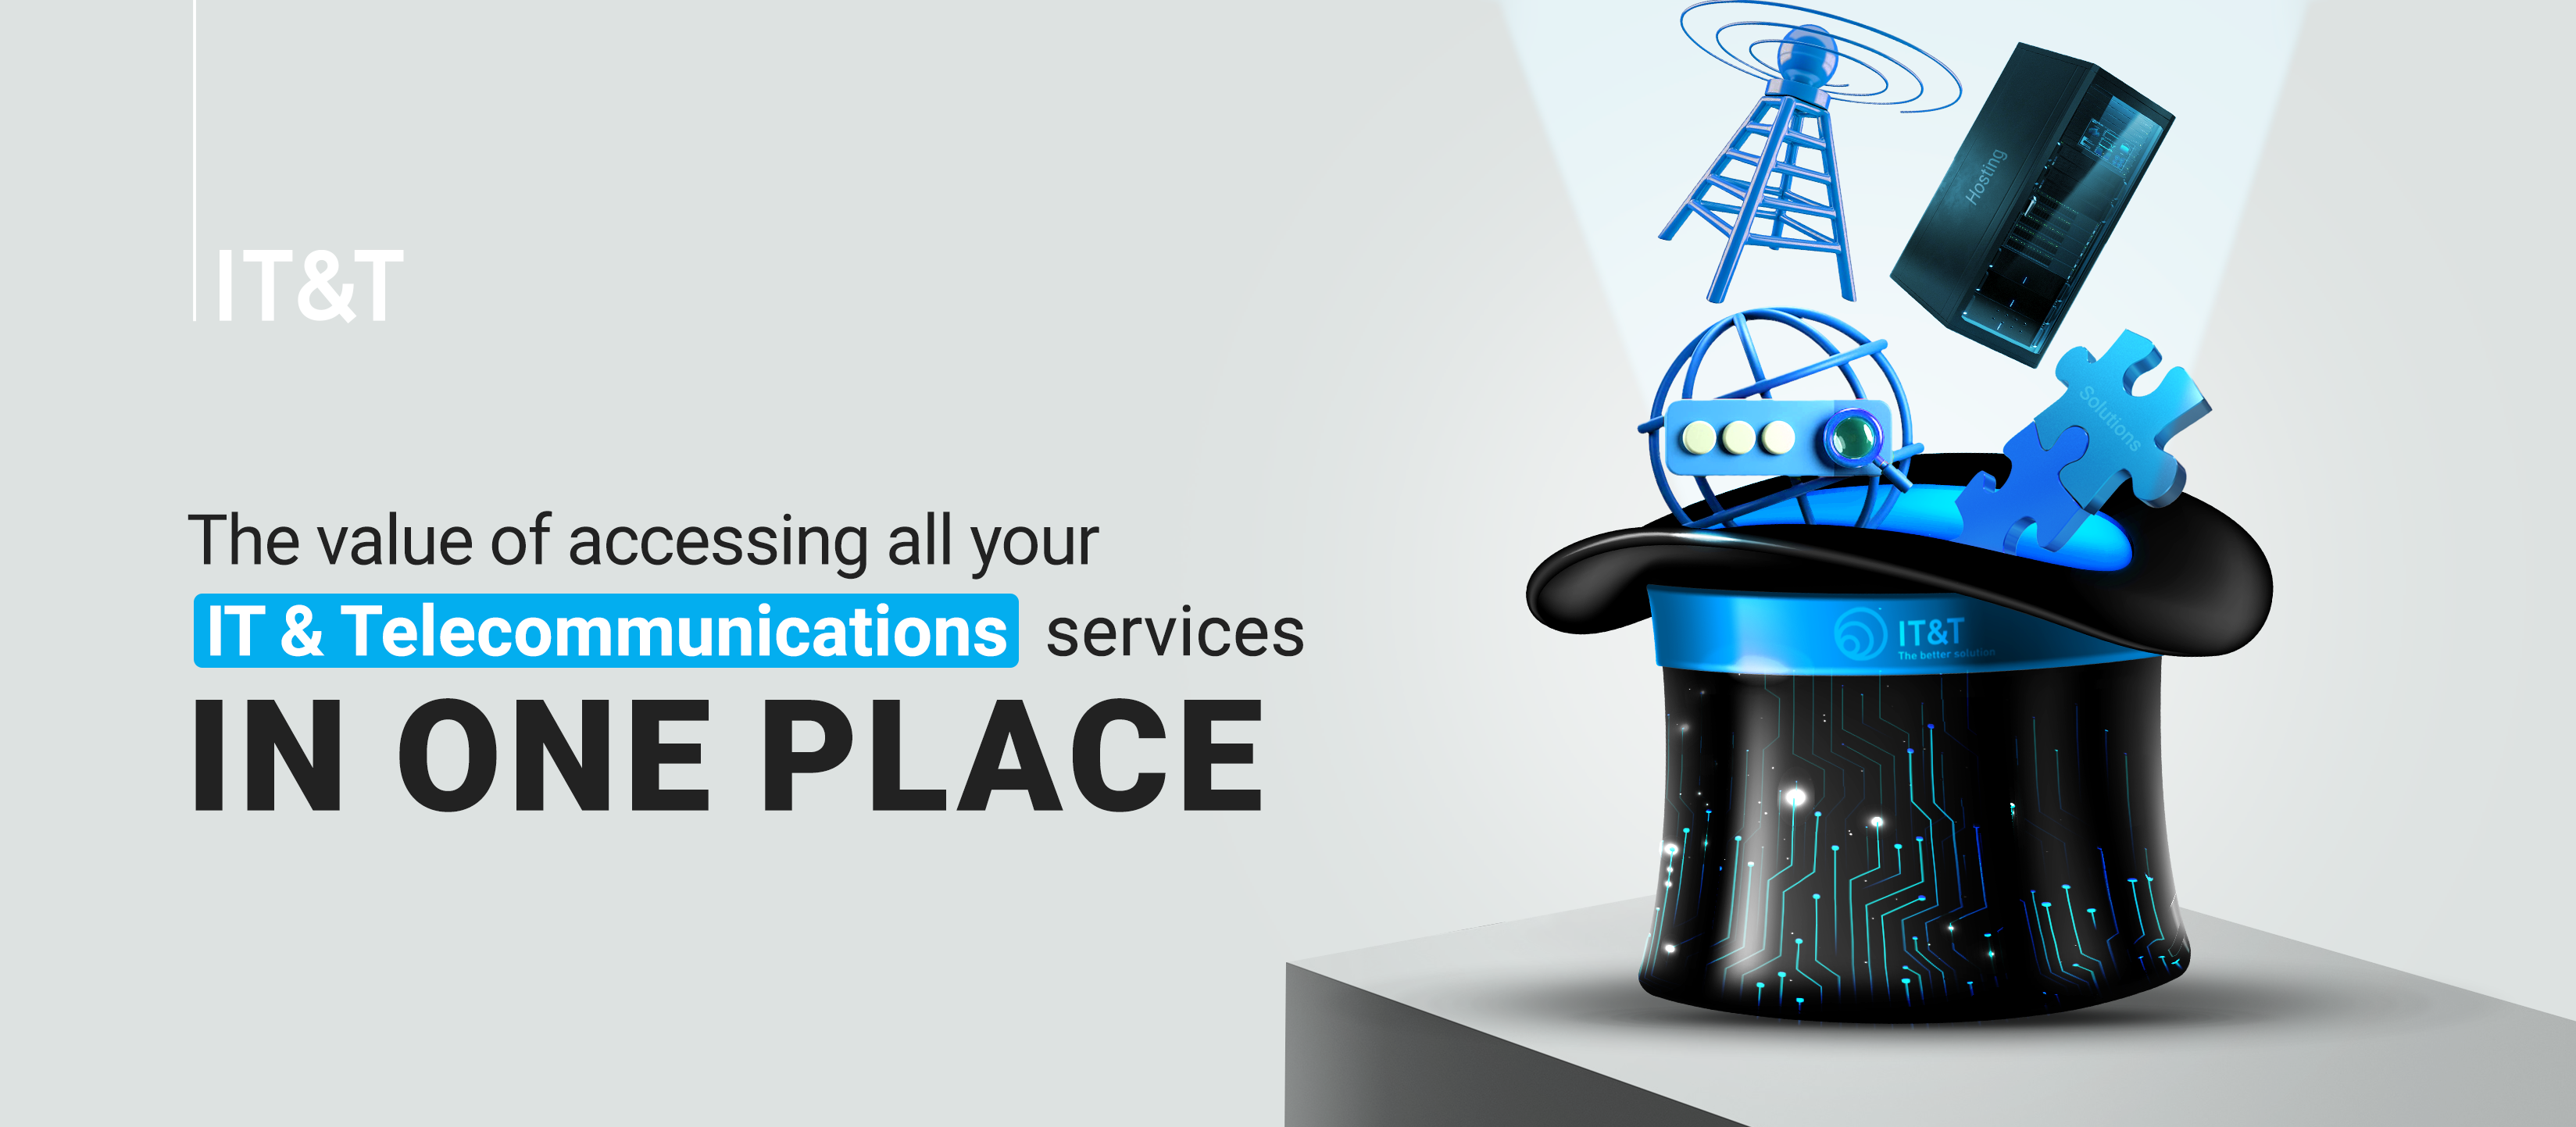 The value of accessing all your IT and telecommunications services in one place